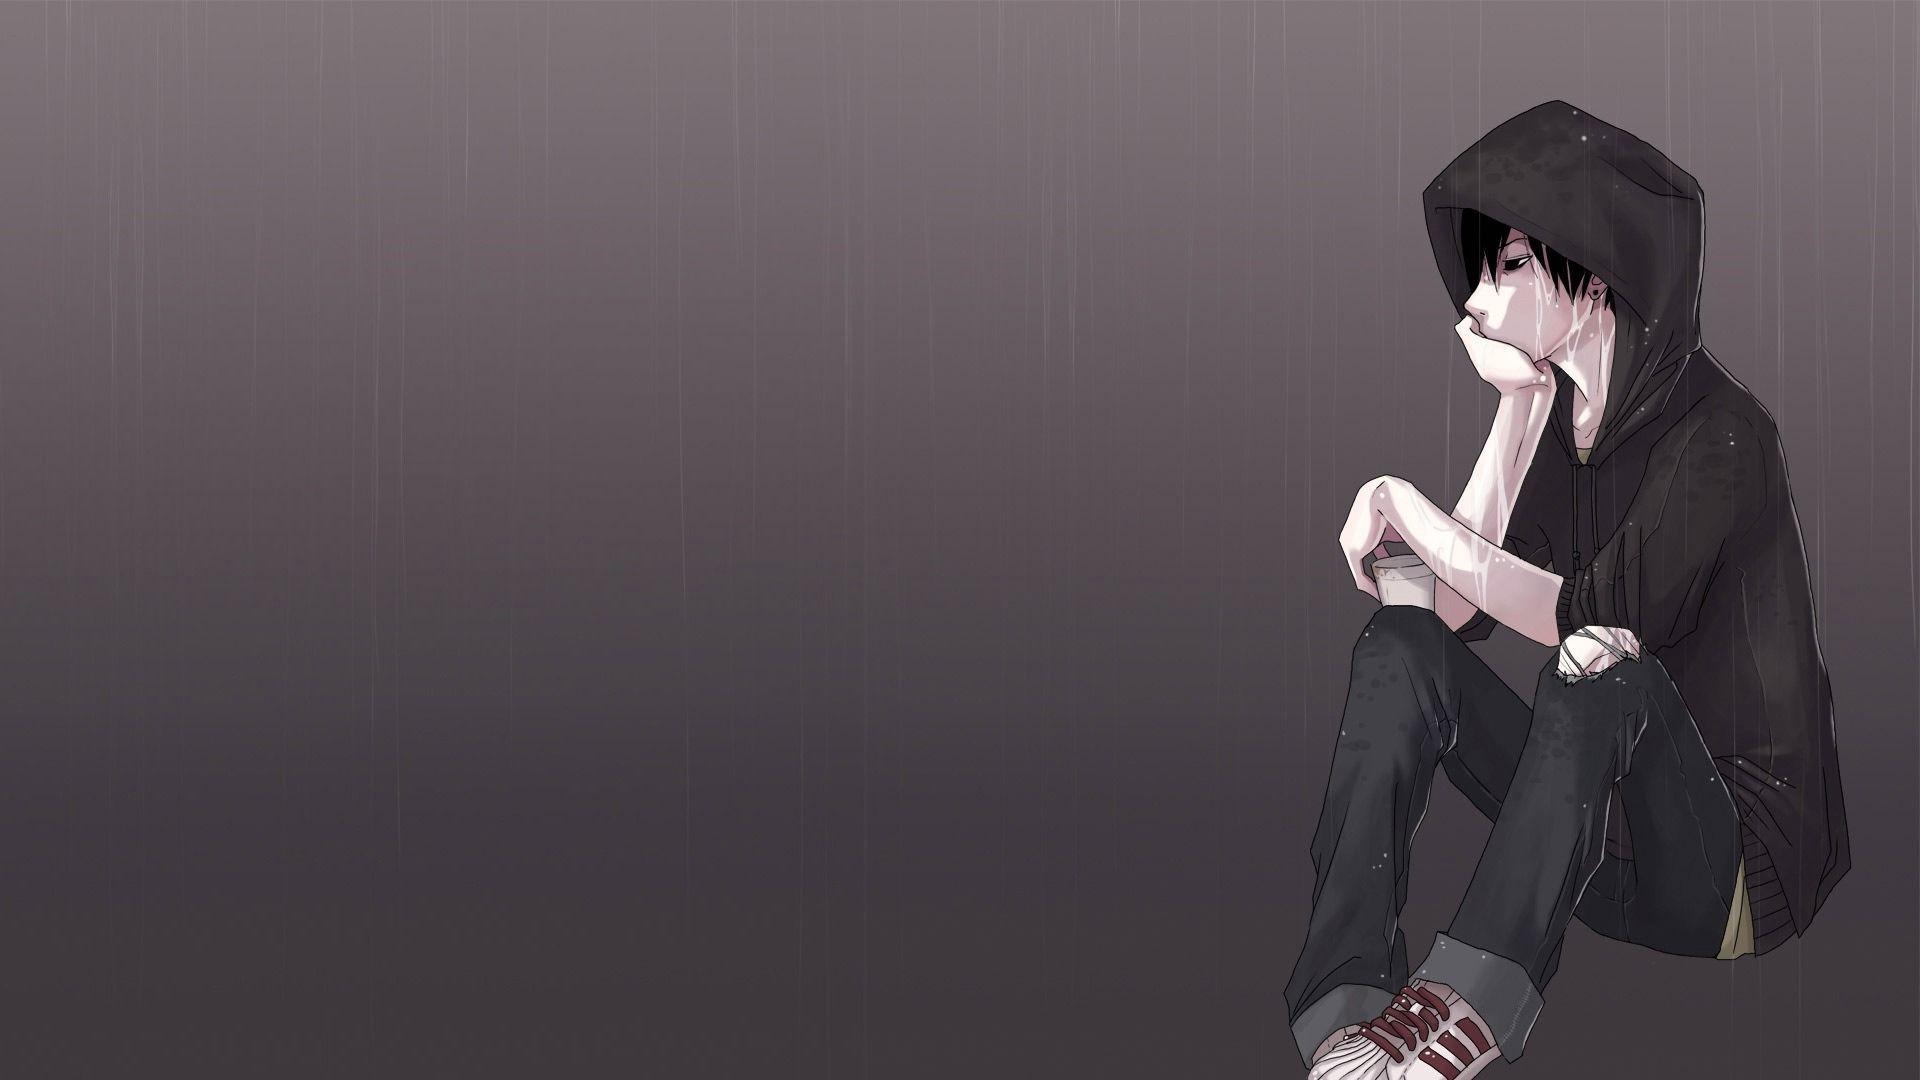 Lonely Anime Boy Wallpapers Top Free Lonely Anime Boy Backgrounds Wallpaperaccess How to draw anime boy back view no timelapse. lonely anime boy wallpapers top free